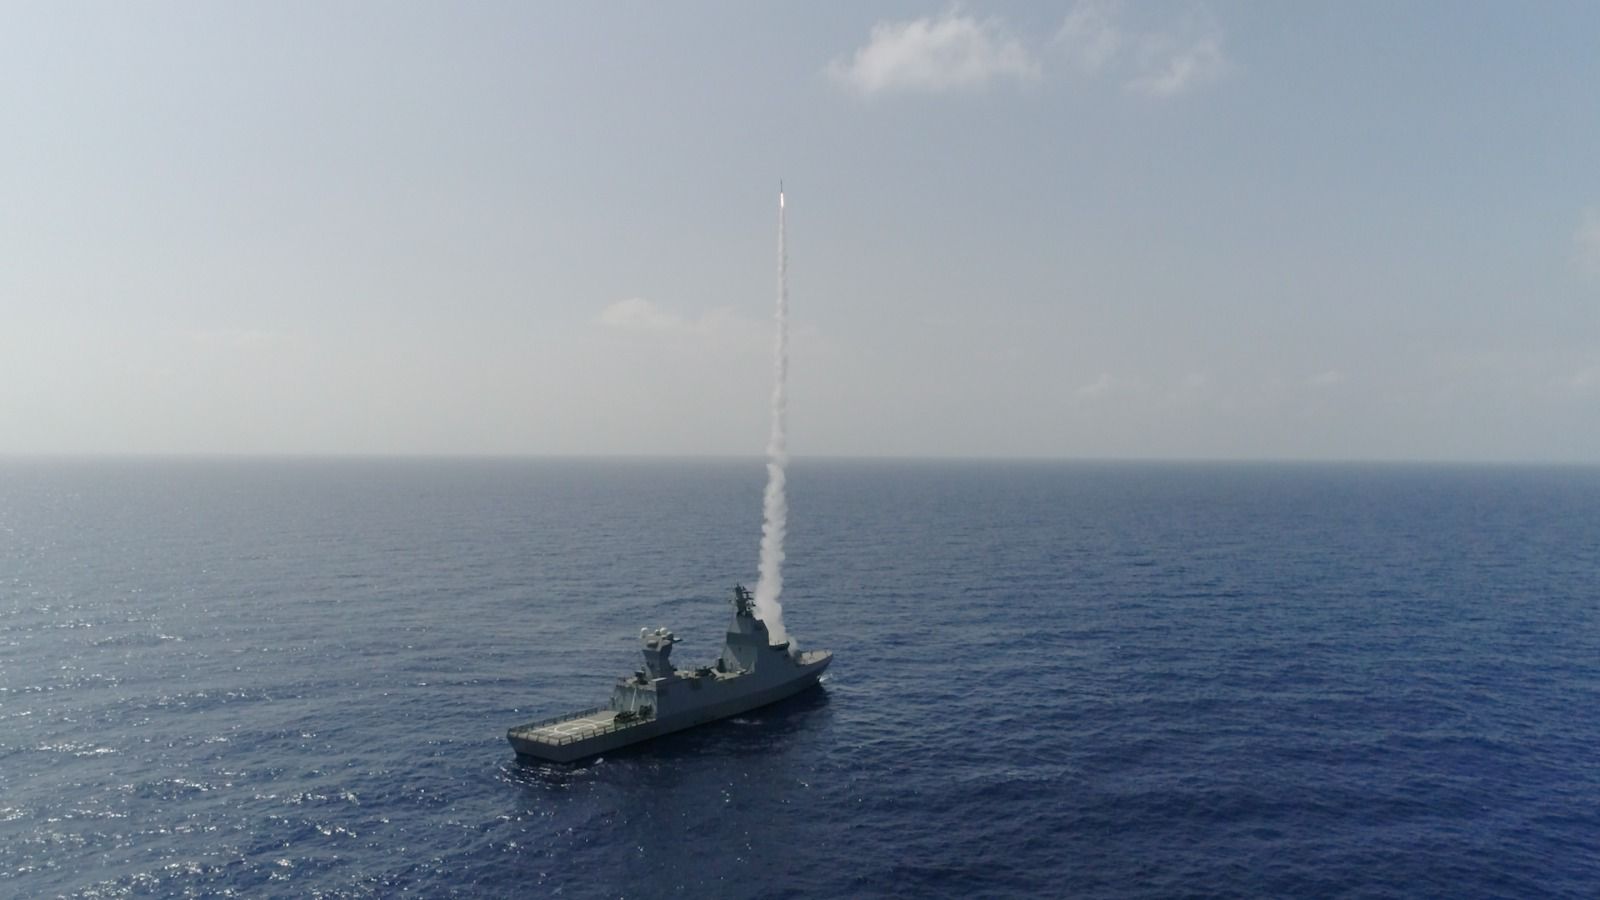 The Israel Missile Defense Organization (IMDO) has completed a series of tests using the naval version of the Iron Dome system known as "C-Dome".